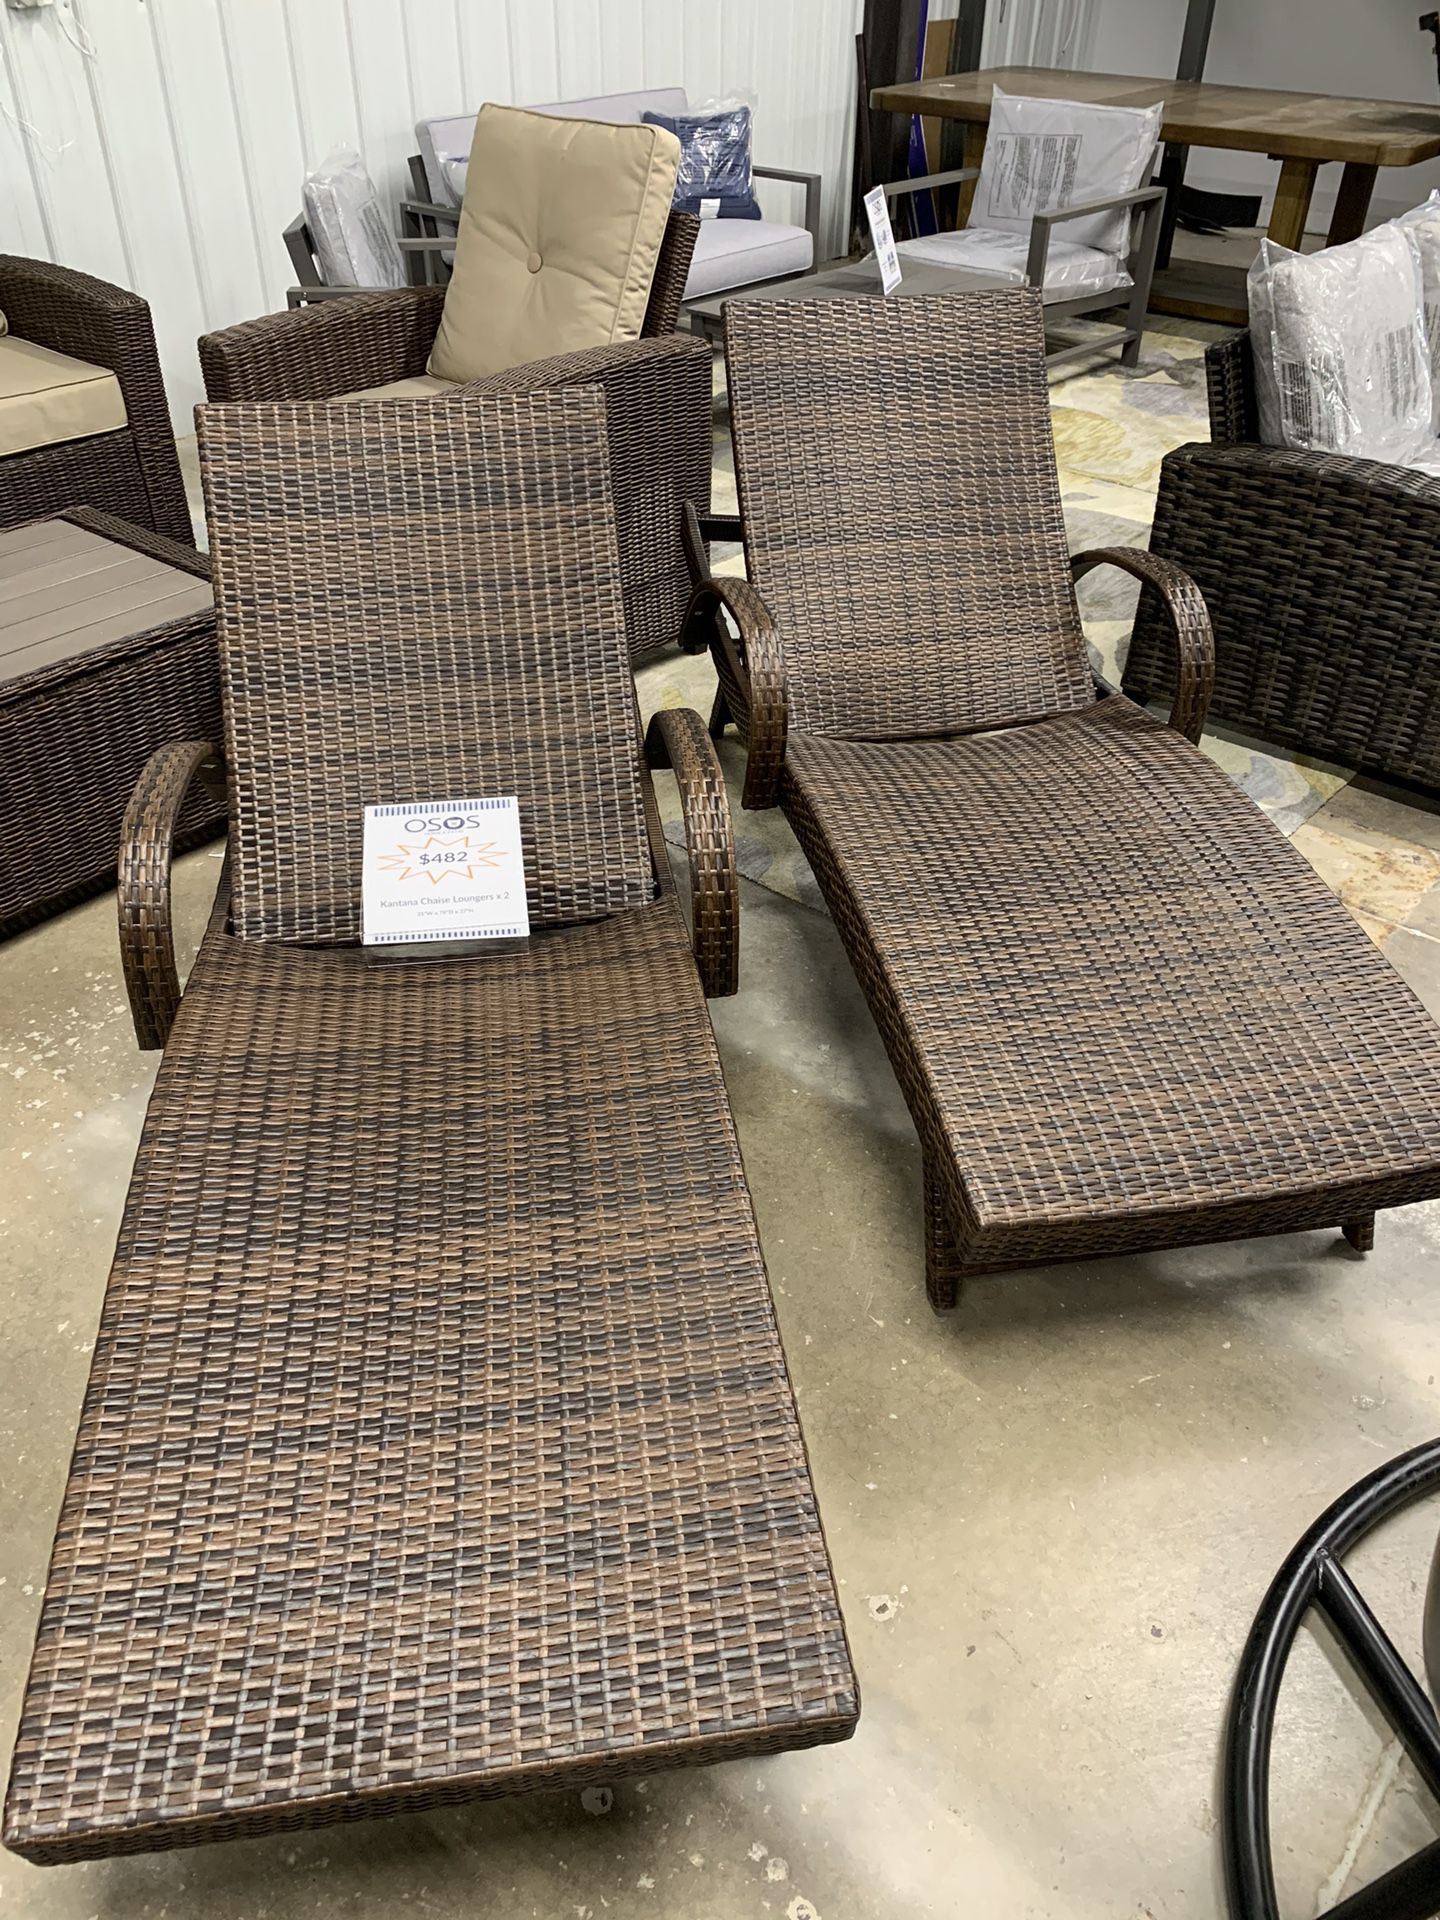 Set of 2 Kantana Outdoor Chaise Lounge Patio Furniture Chairs